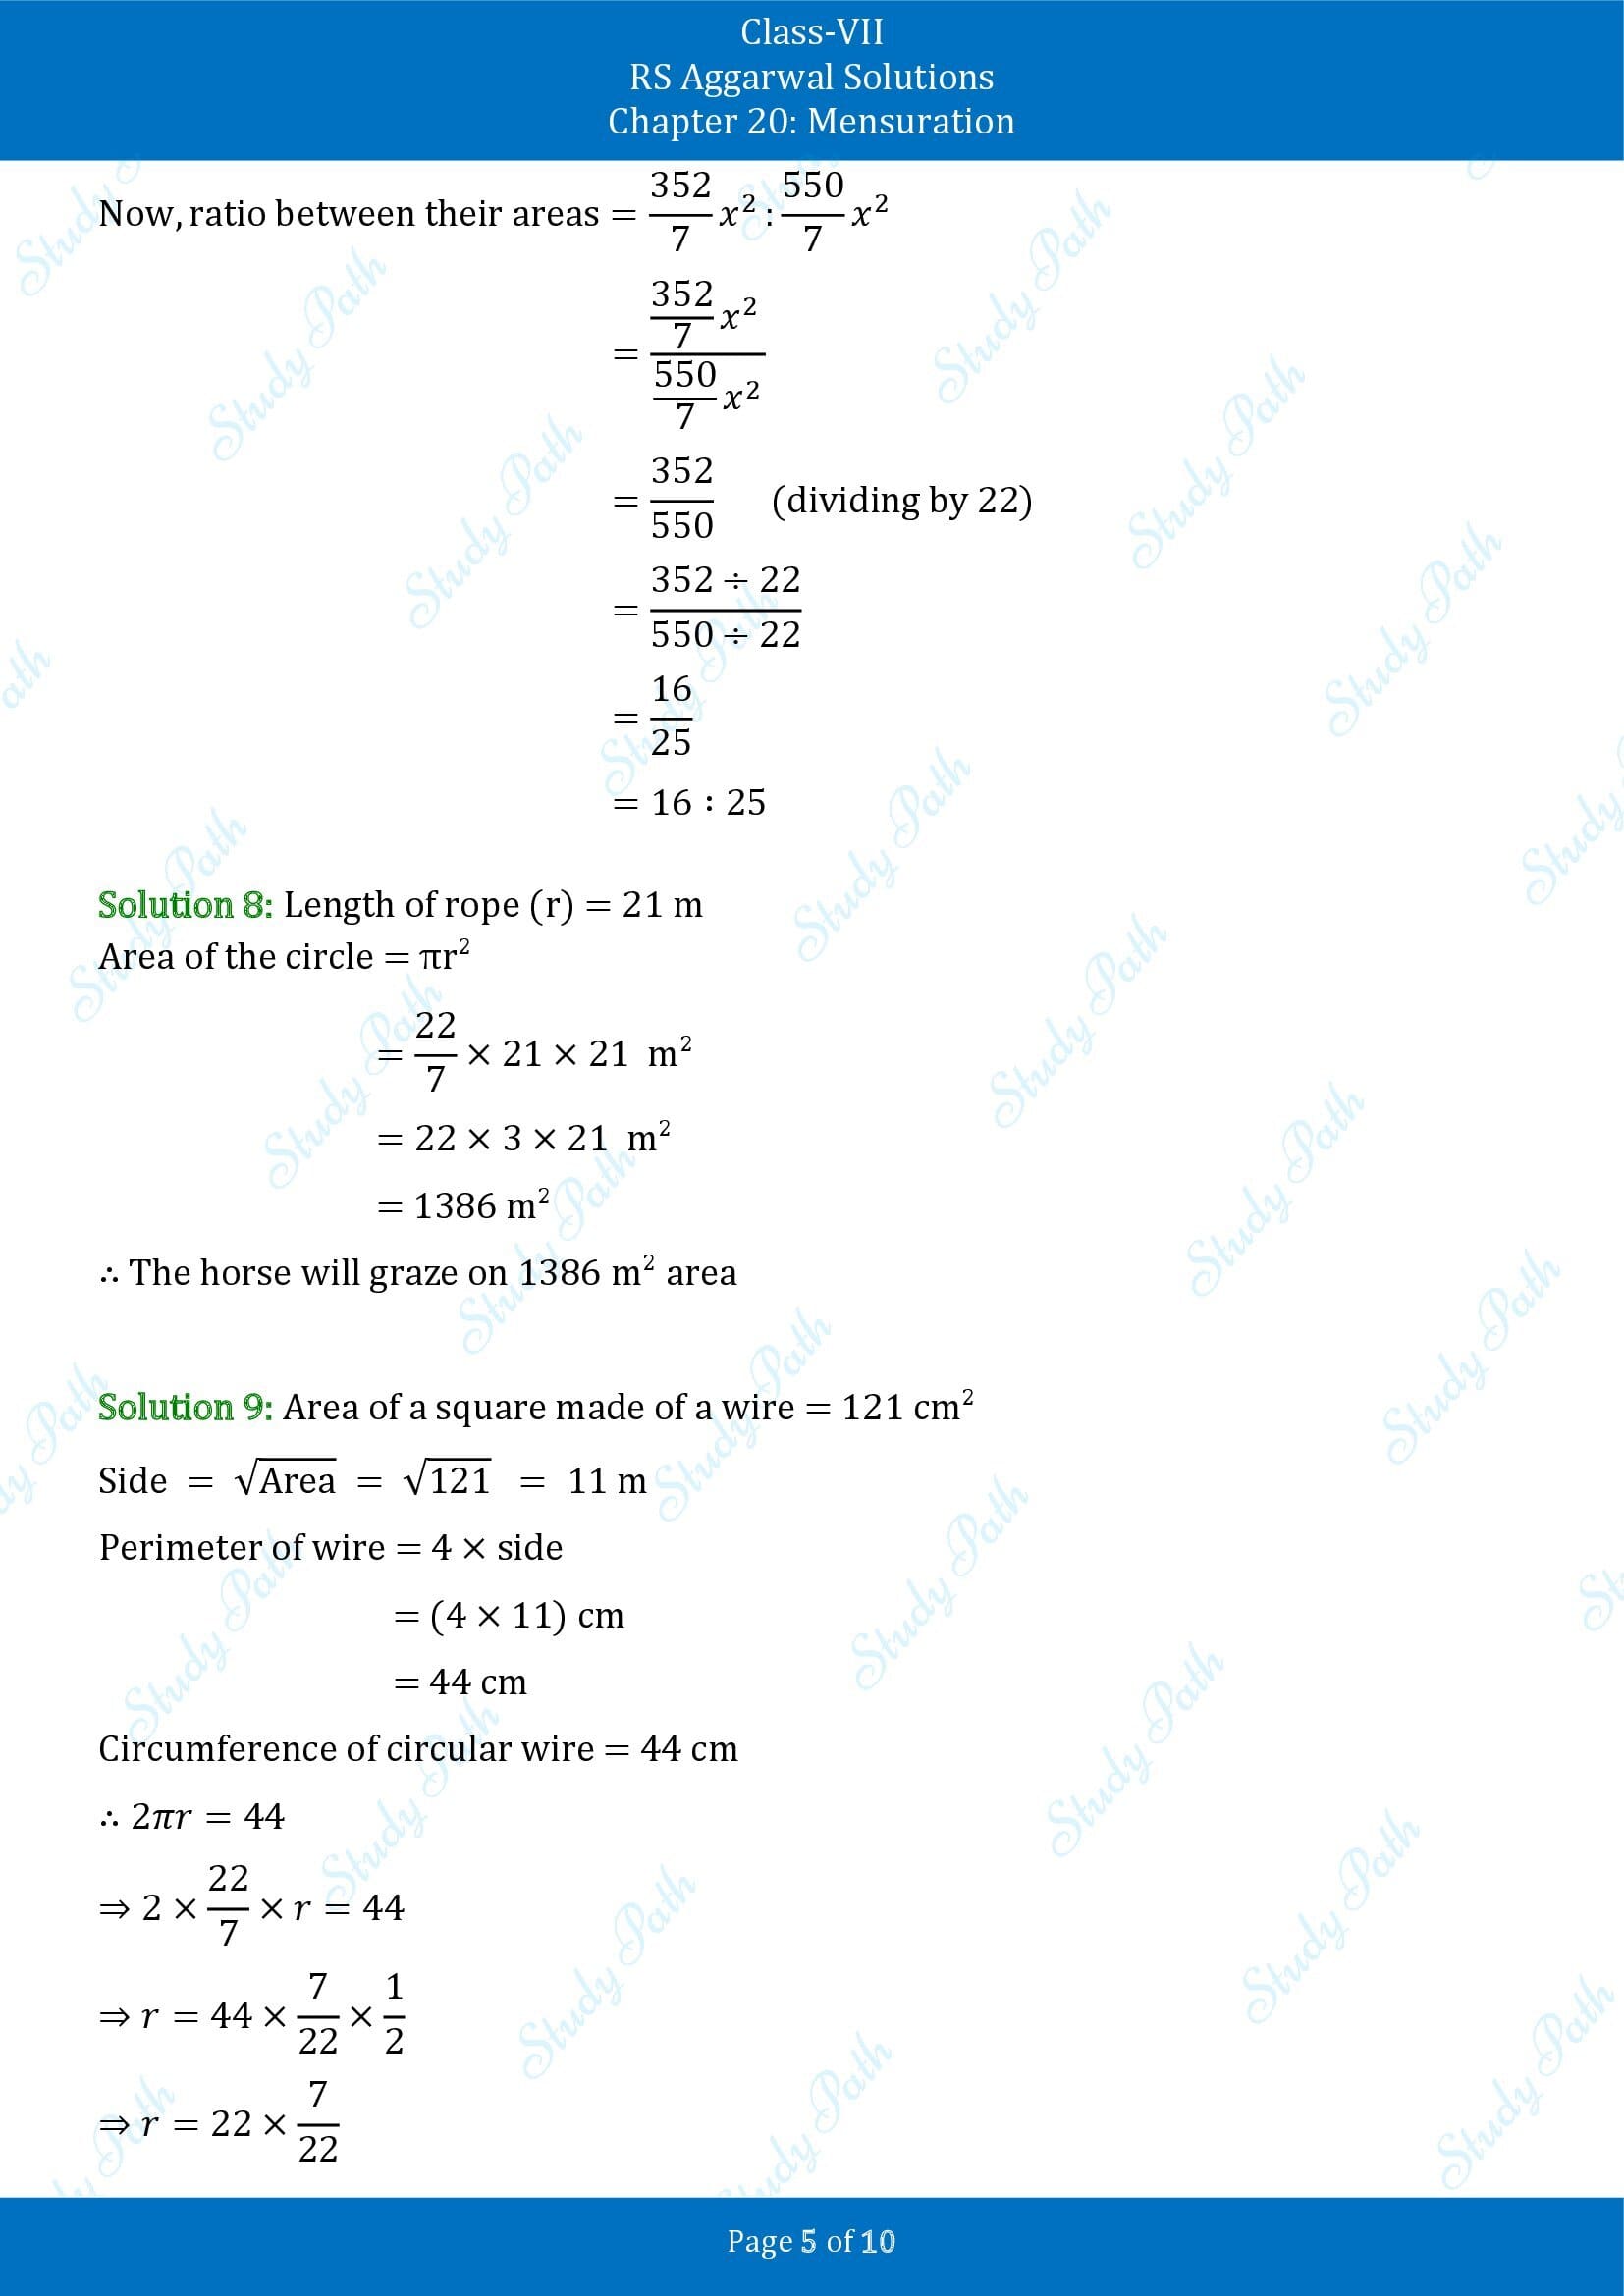 RS Aggarwal Solutions Class 7 Chapter 20 Mensuration Exercise 20F 00005